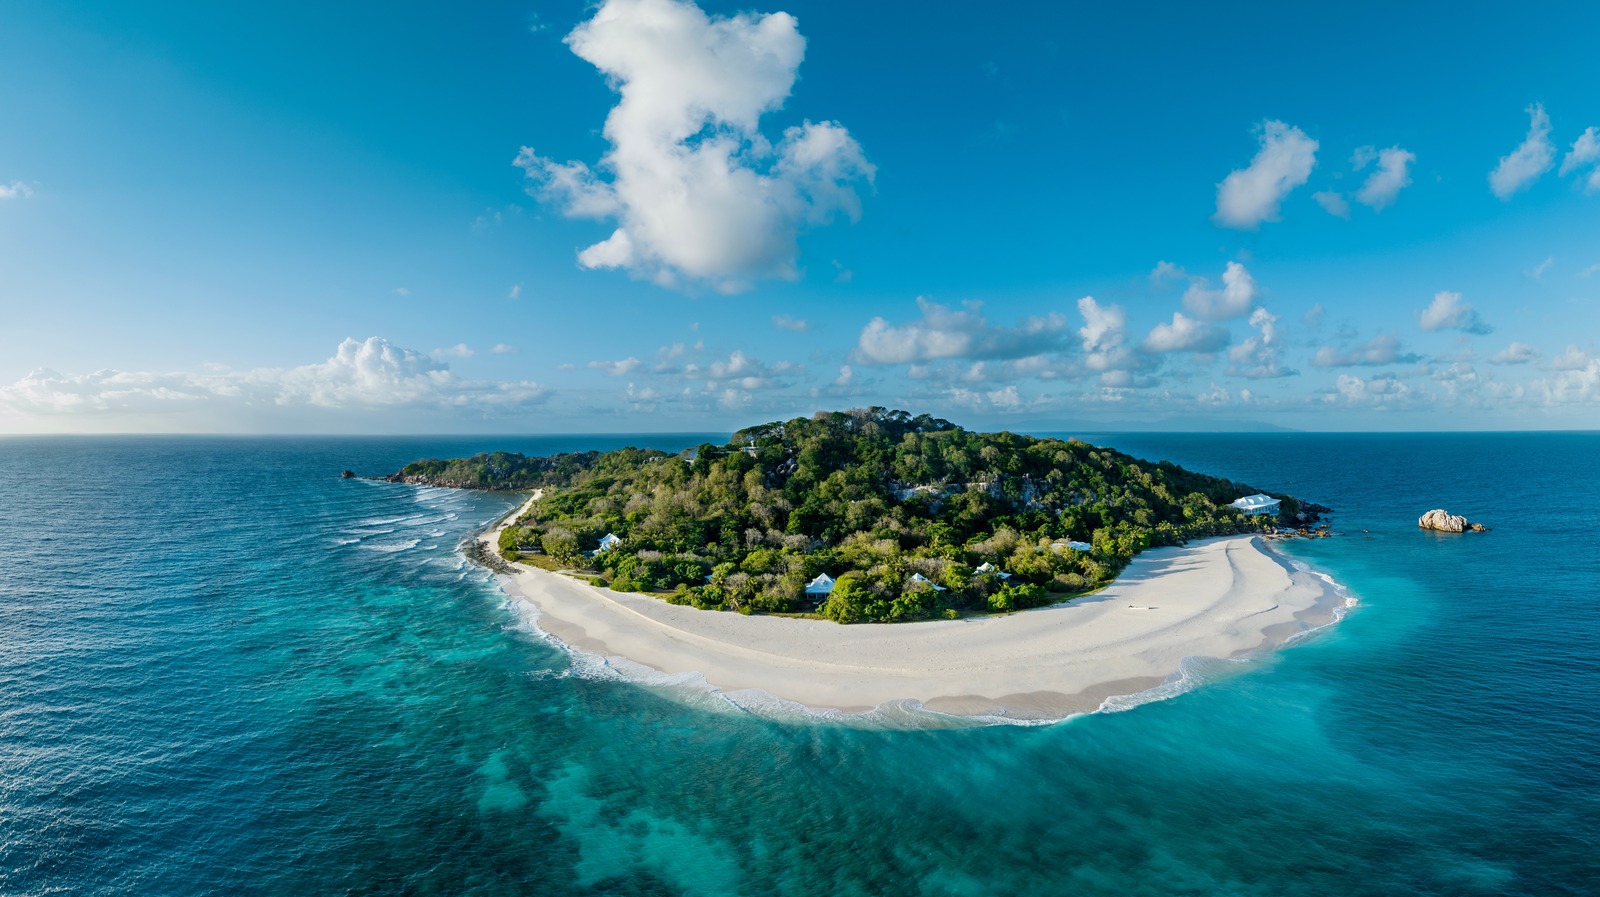 10 beautiful islands for a slice of paradise - Rest Less